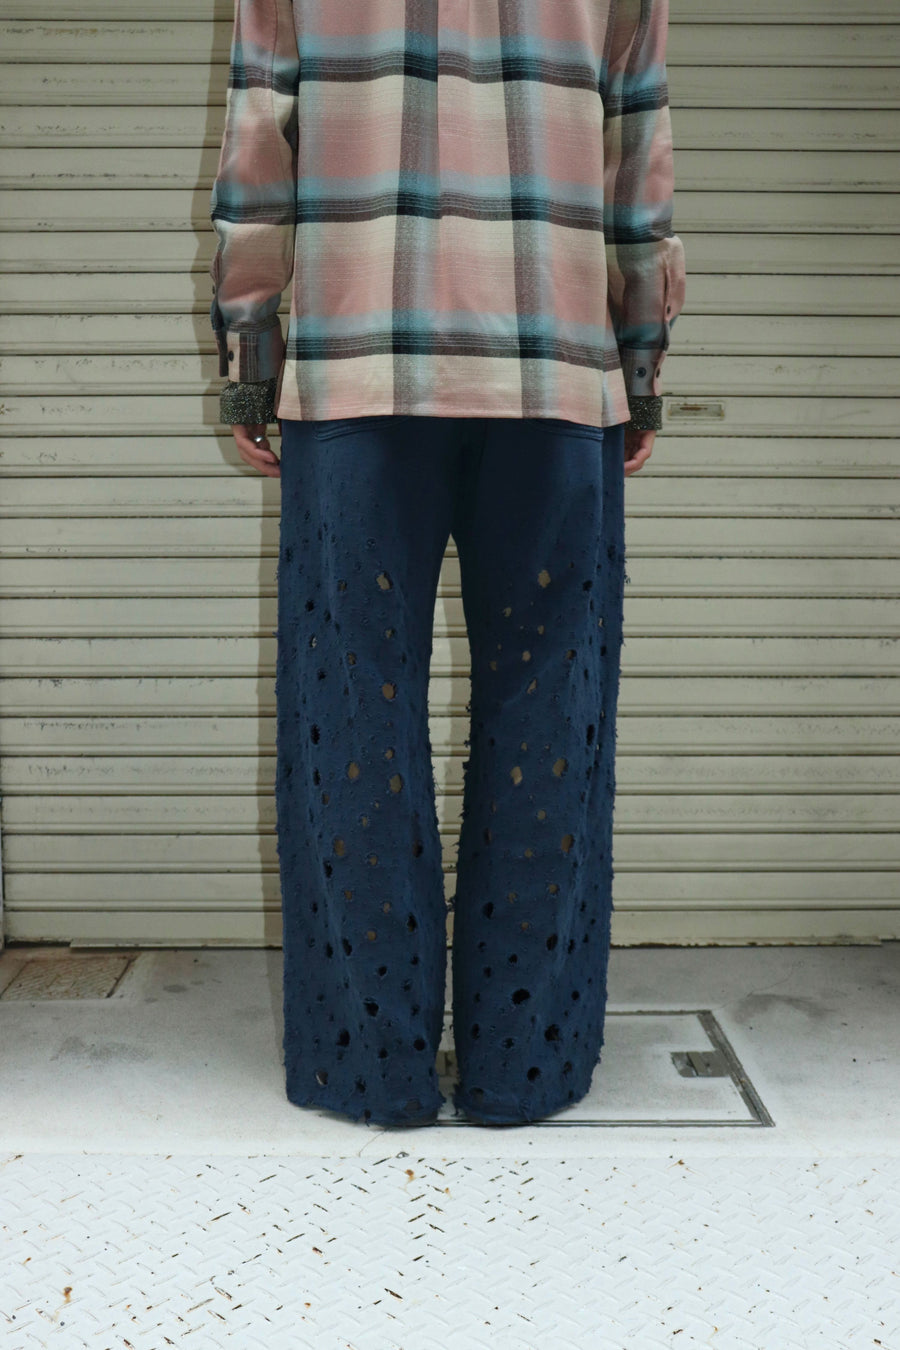 SUGARHILL  CRASHED SWEAT TROUSERS(OLD NAVY)